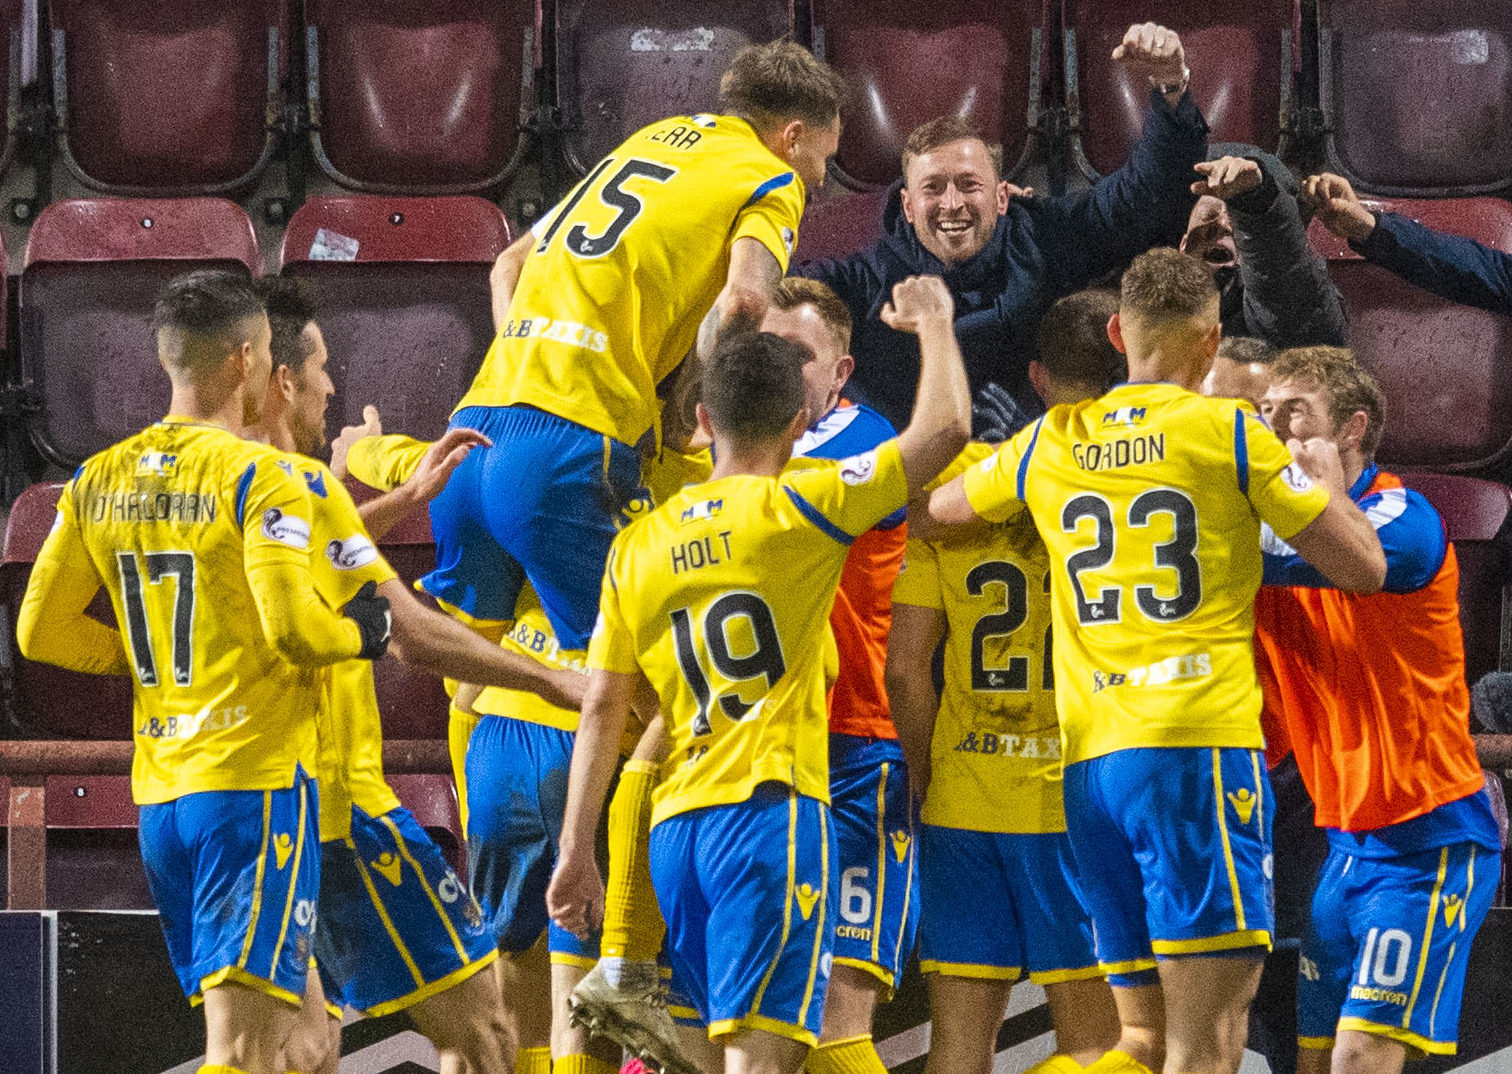 The St Johnstone players celebrate the winning goal against Hearts.